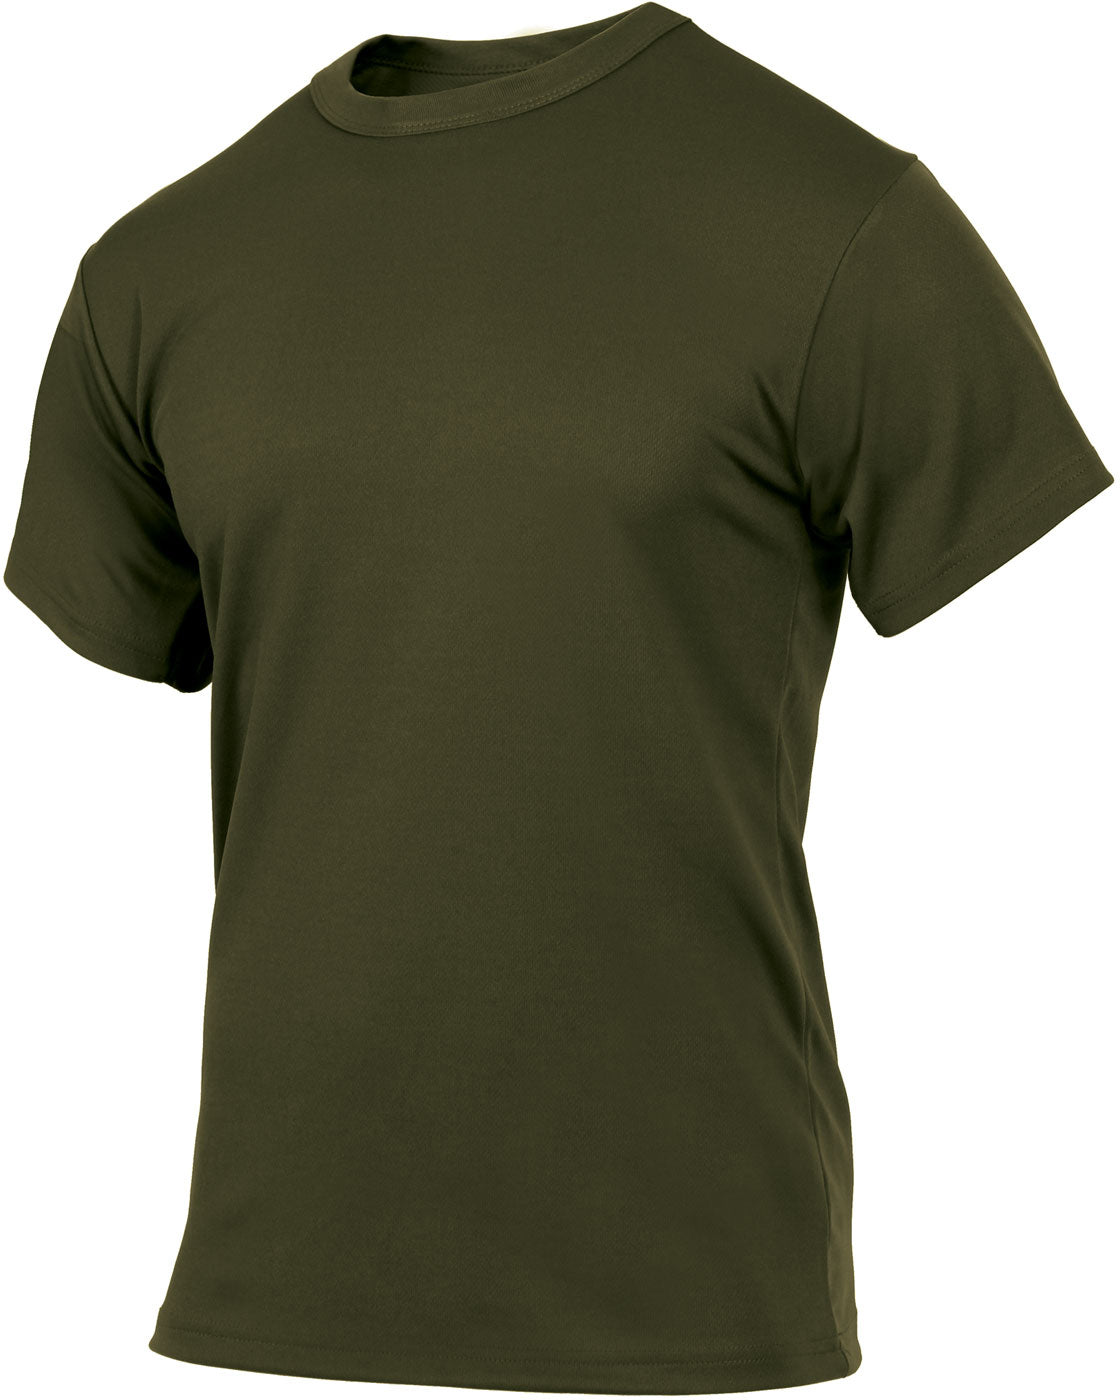 Olive Drab - Quick Dry Moisture Wicking T-Shirt